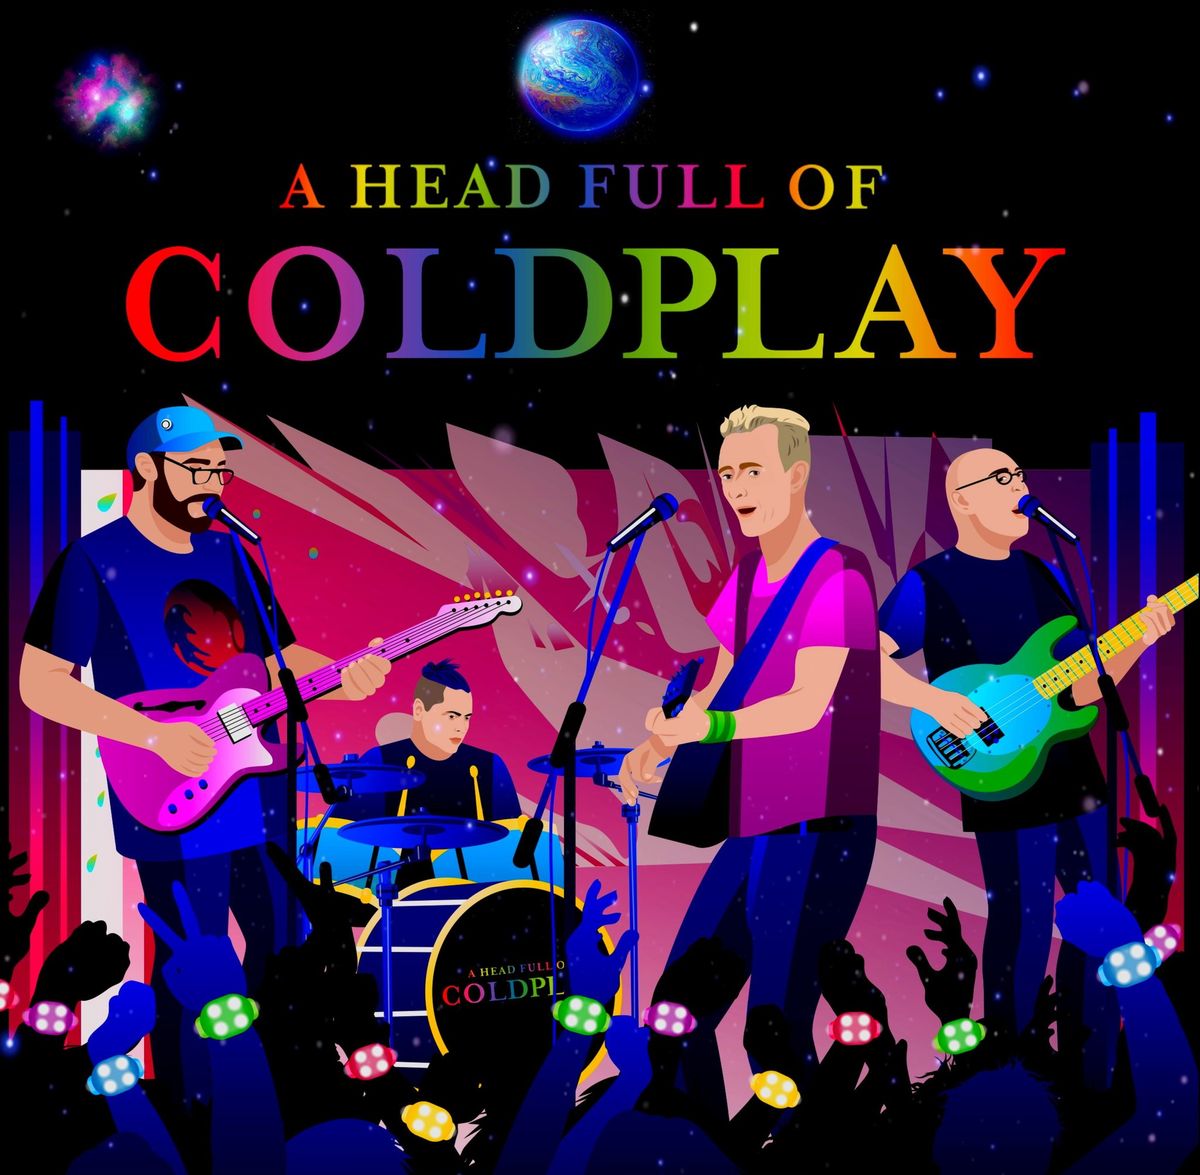 A Head Full Of Coldplay - A Celebration Of The Music